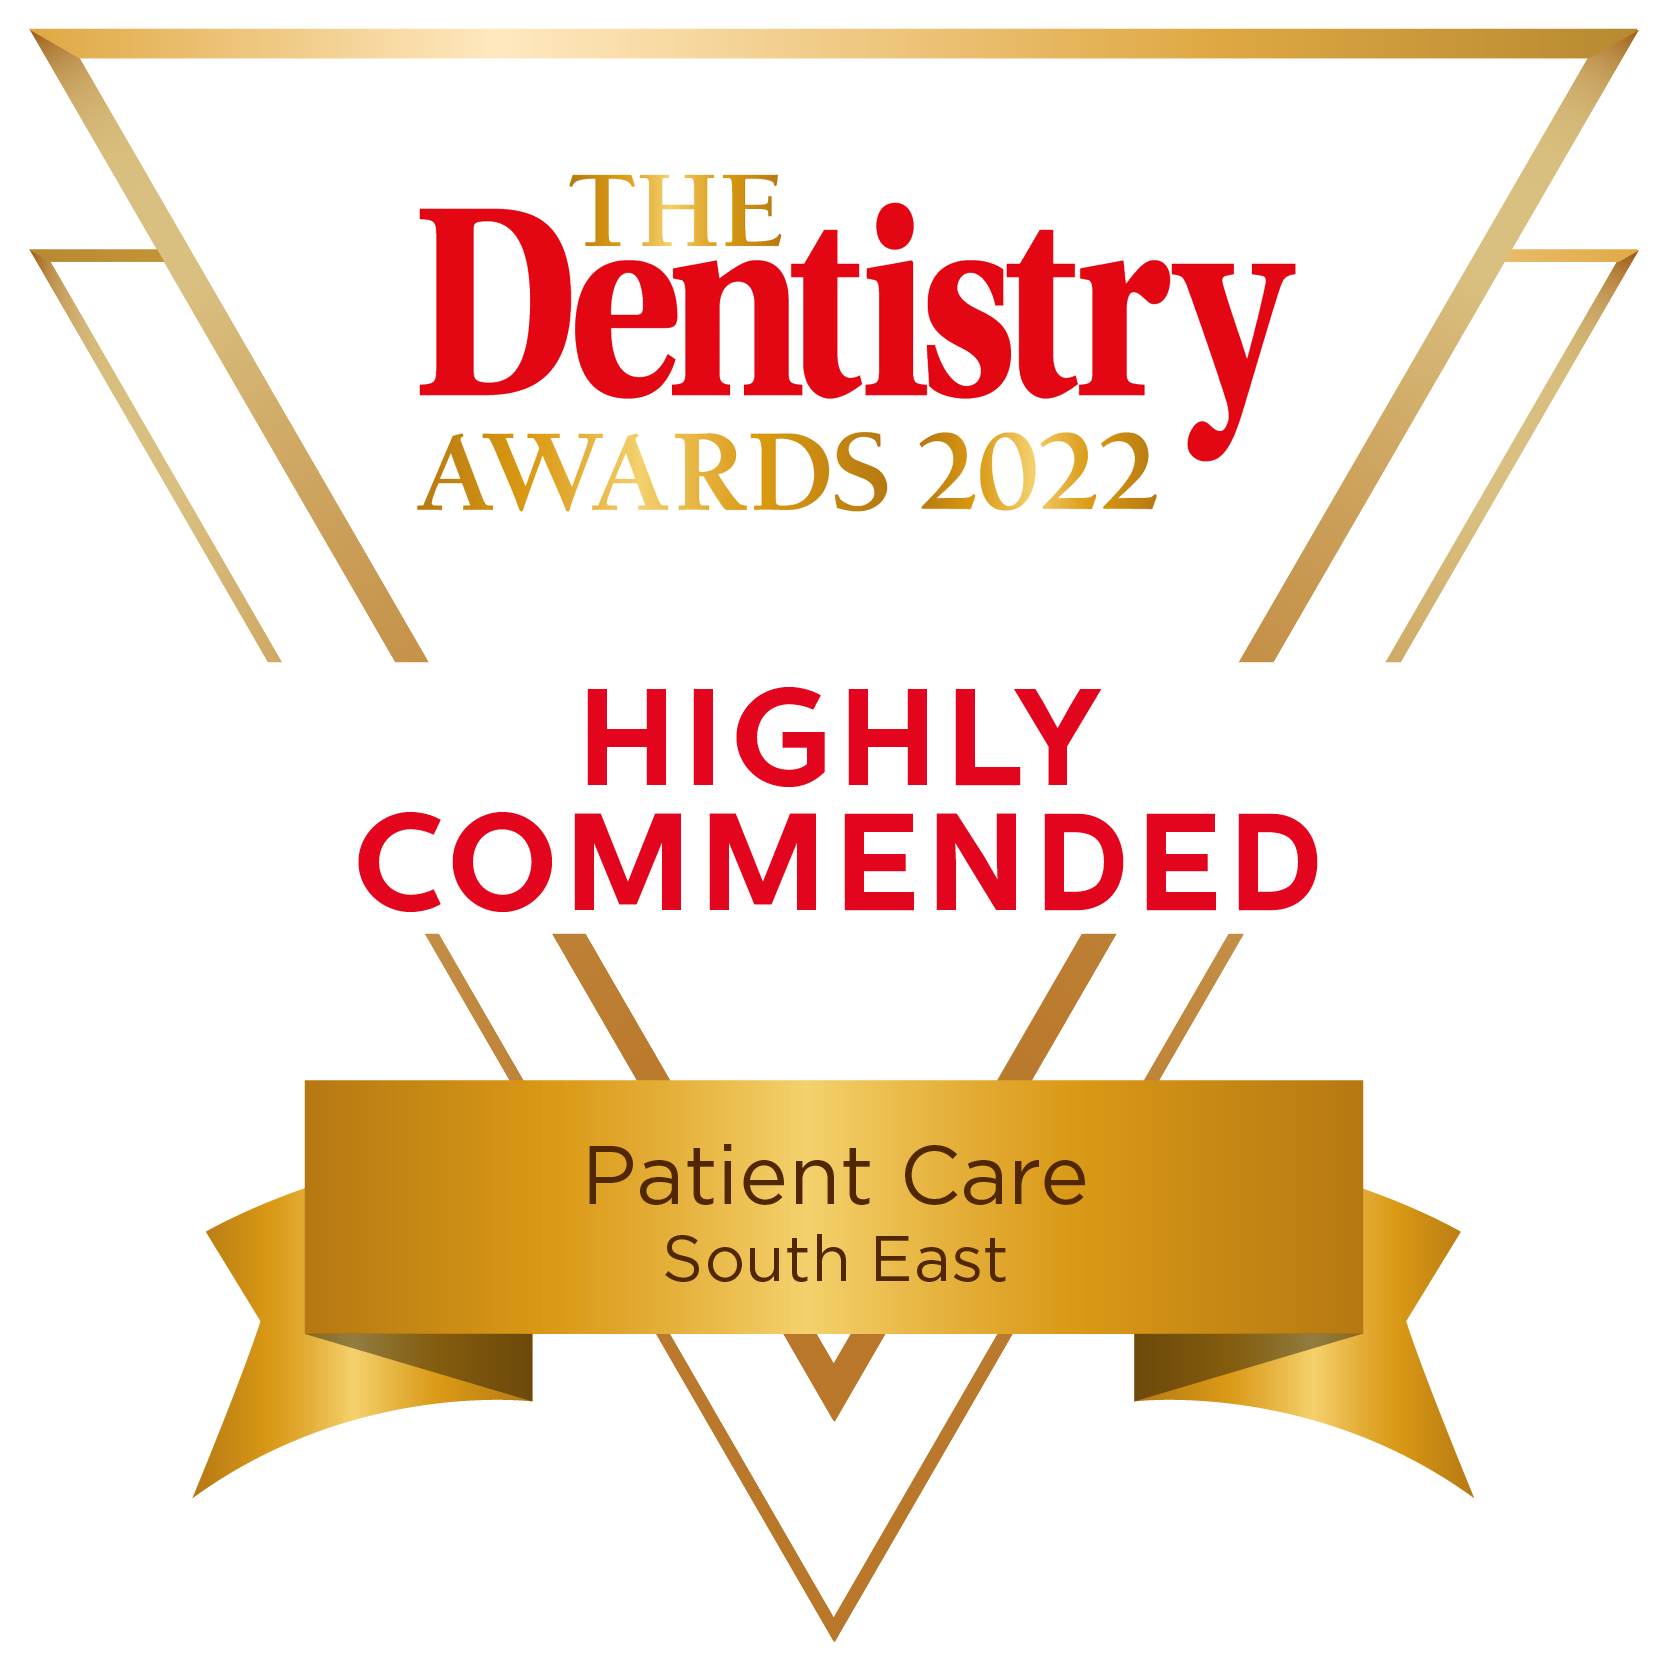 Highly Commended - Patient Care South East - Dentistry Awards 2022